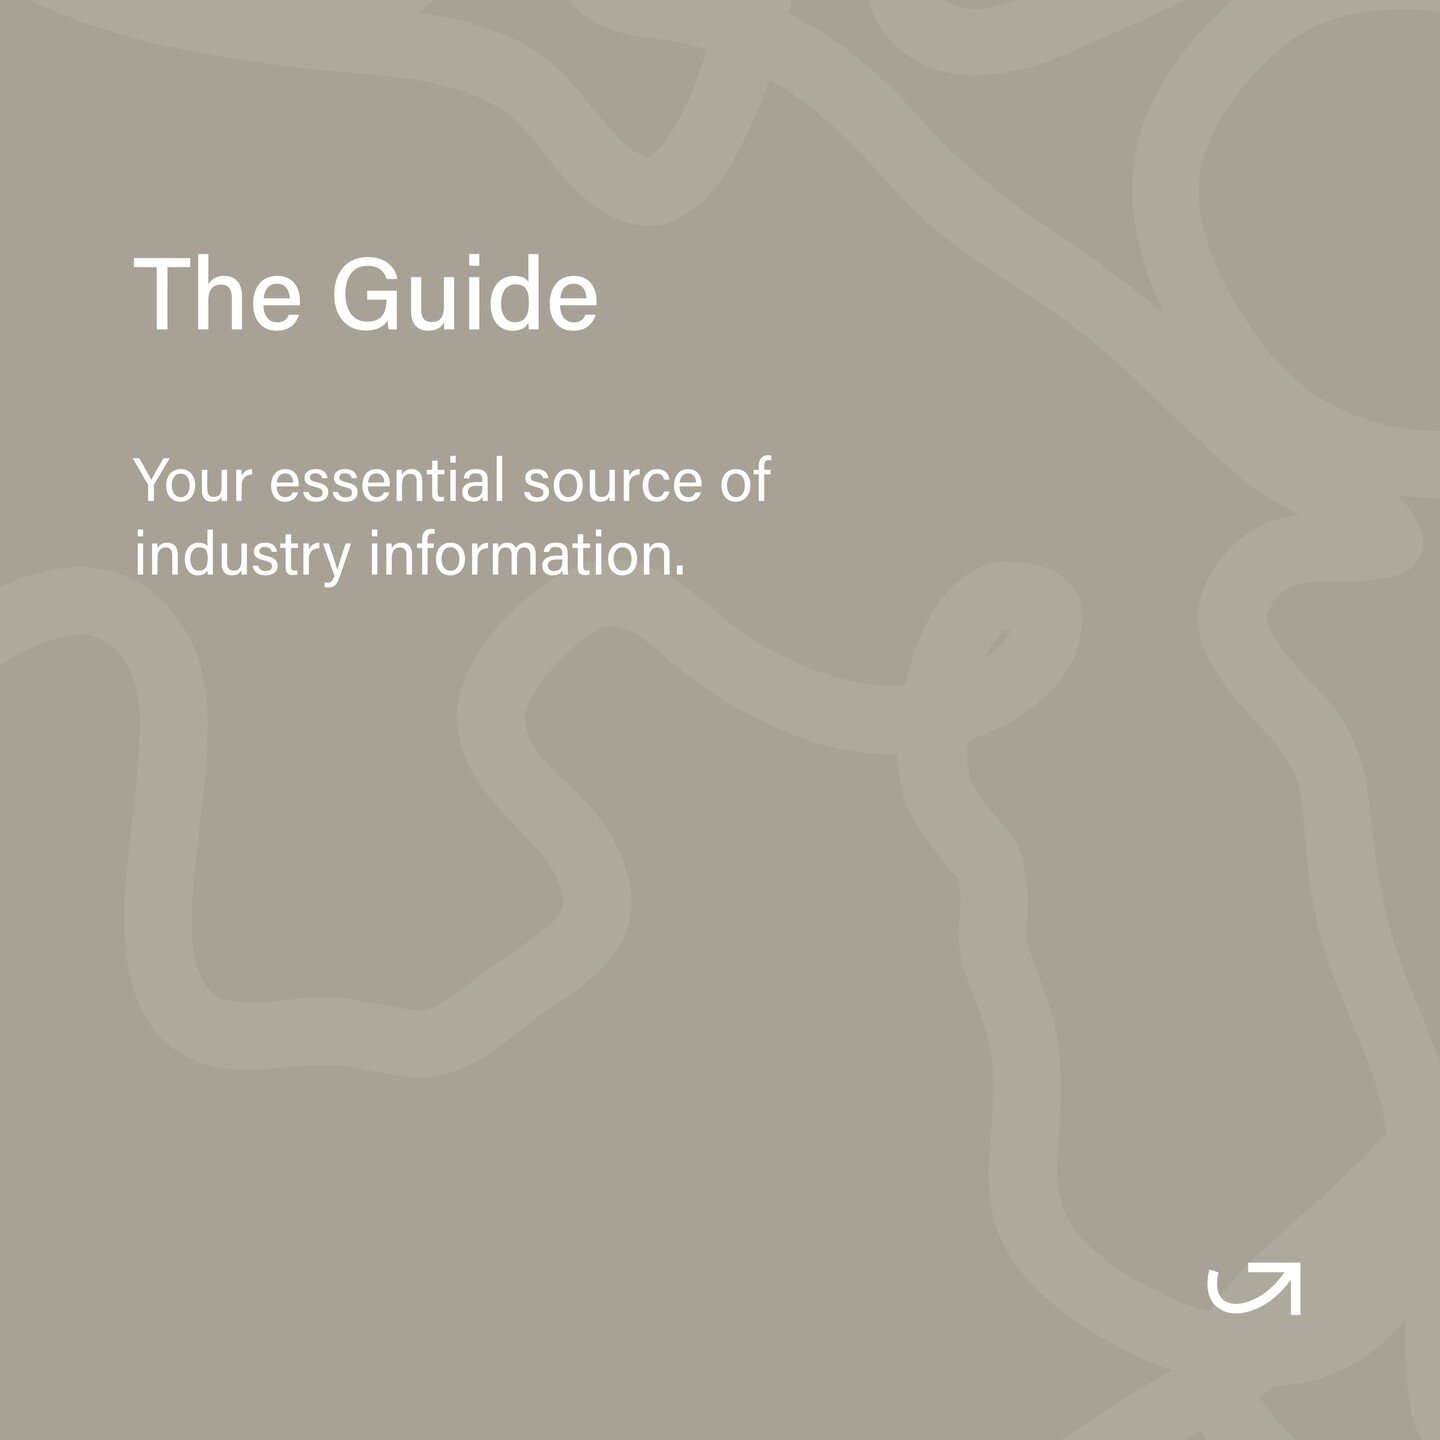 The Guide is your essential source for information on opportunities, grants, events, and professional development programs for creatives.

We curate the most exciting and relevant listings tailored for the creative sector.

Published online and in yo